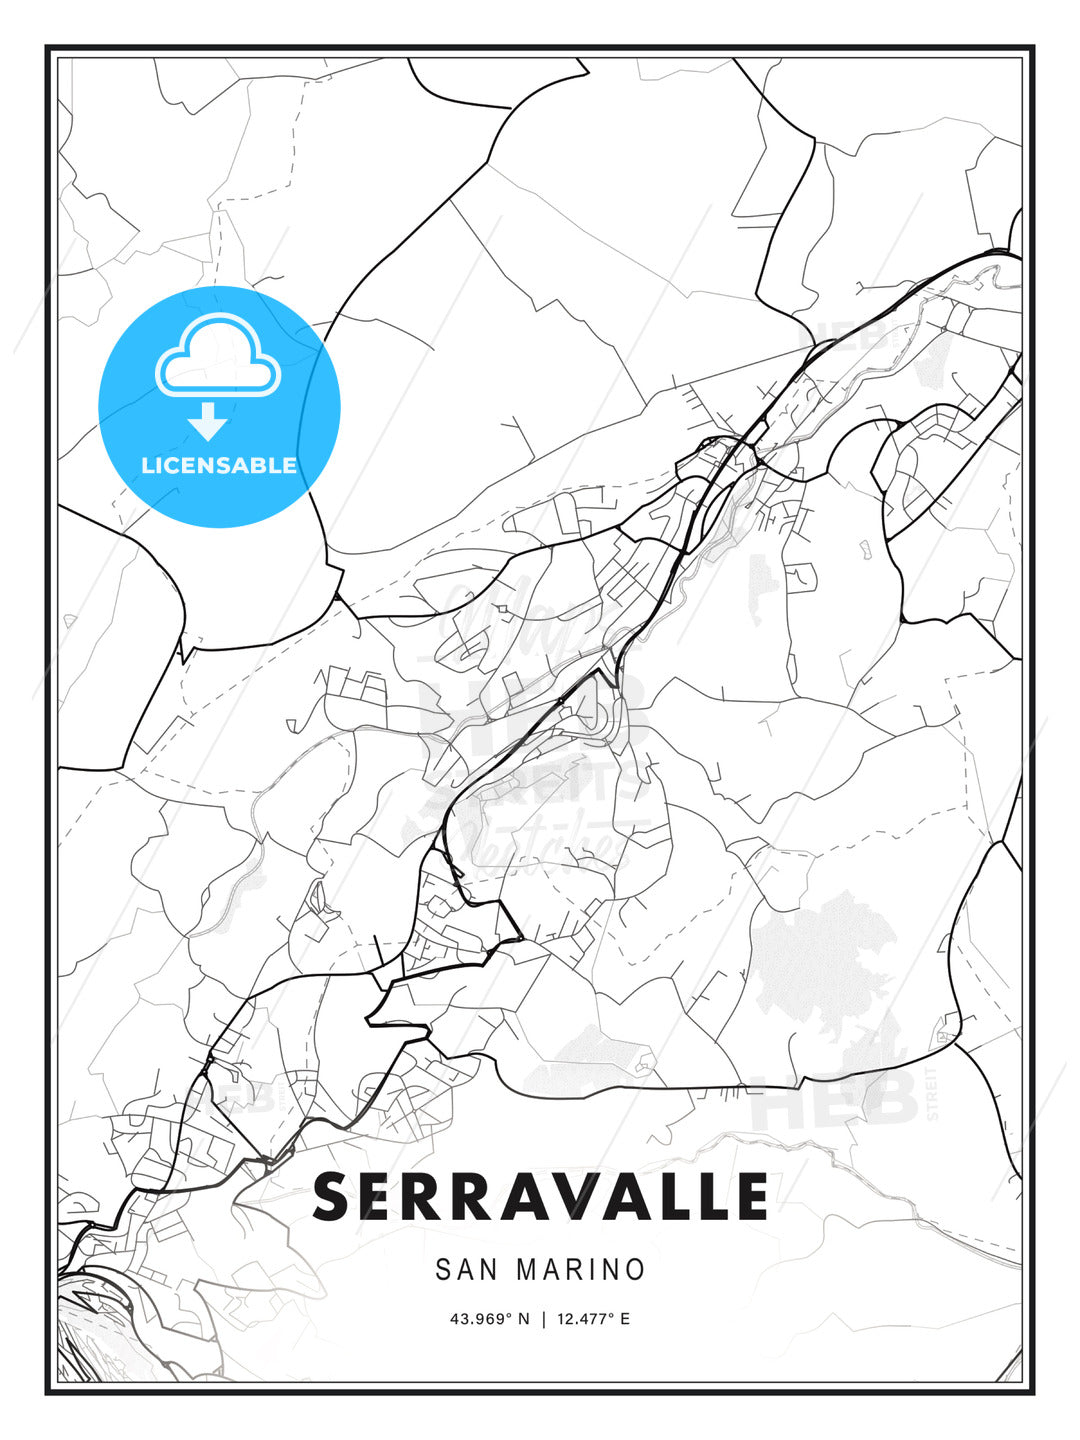 Serravalle, San Marino, Modern Print Template in Various Formats - HEBSTREITS Sketches